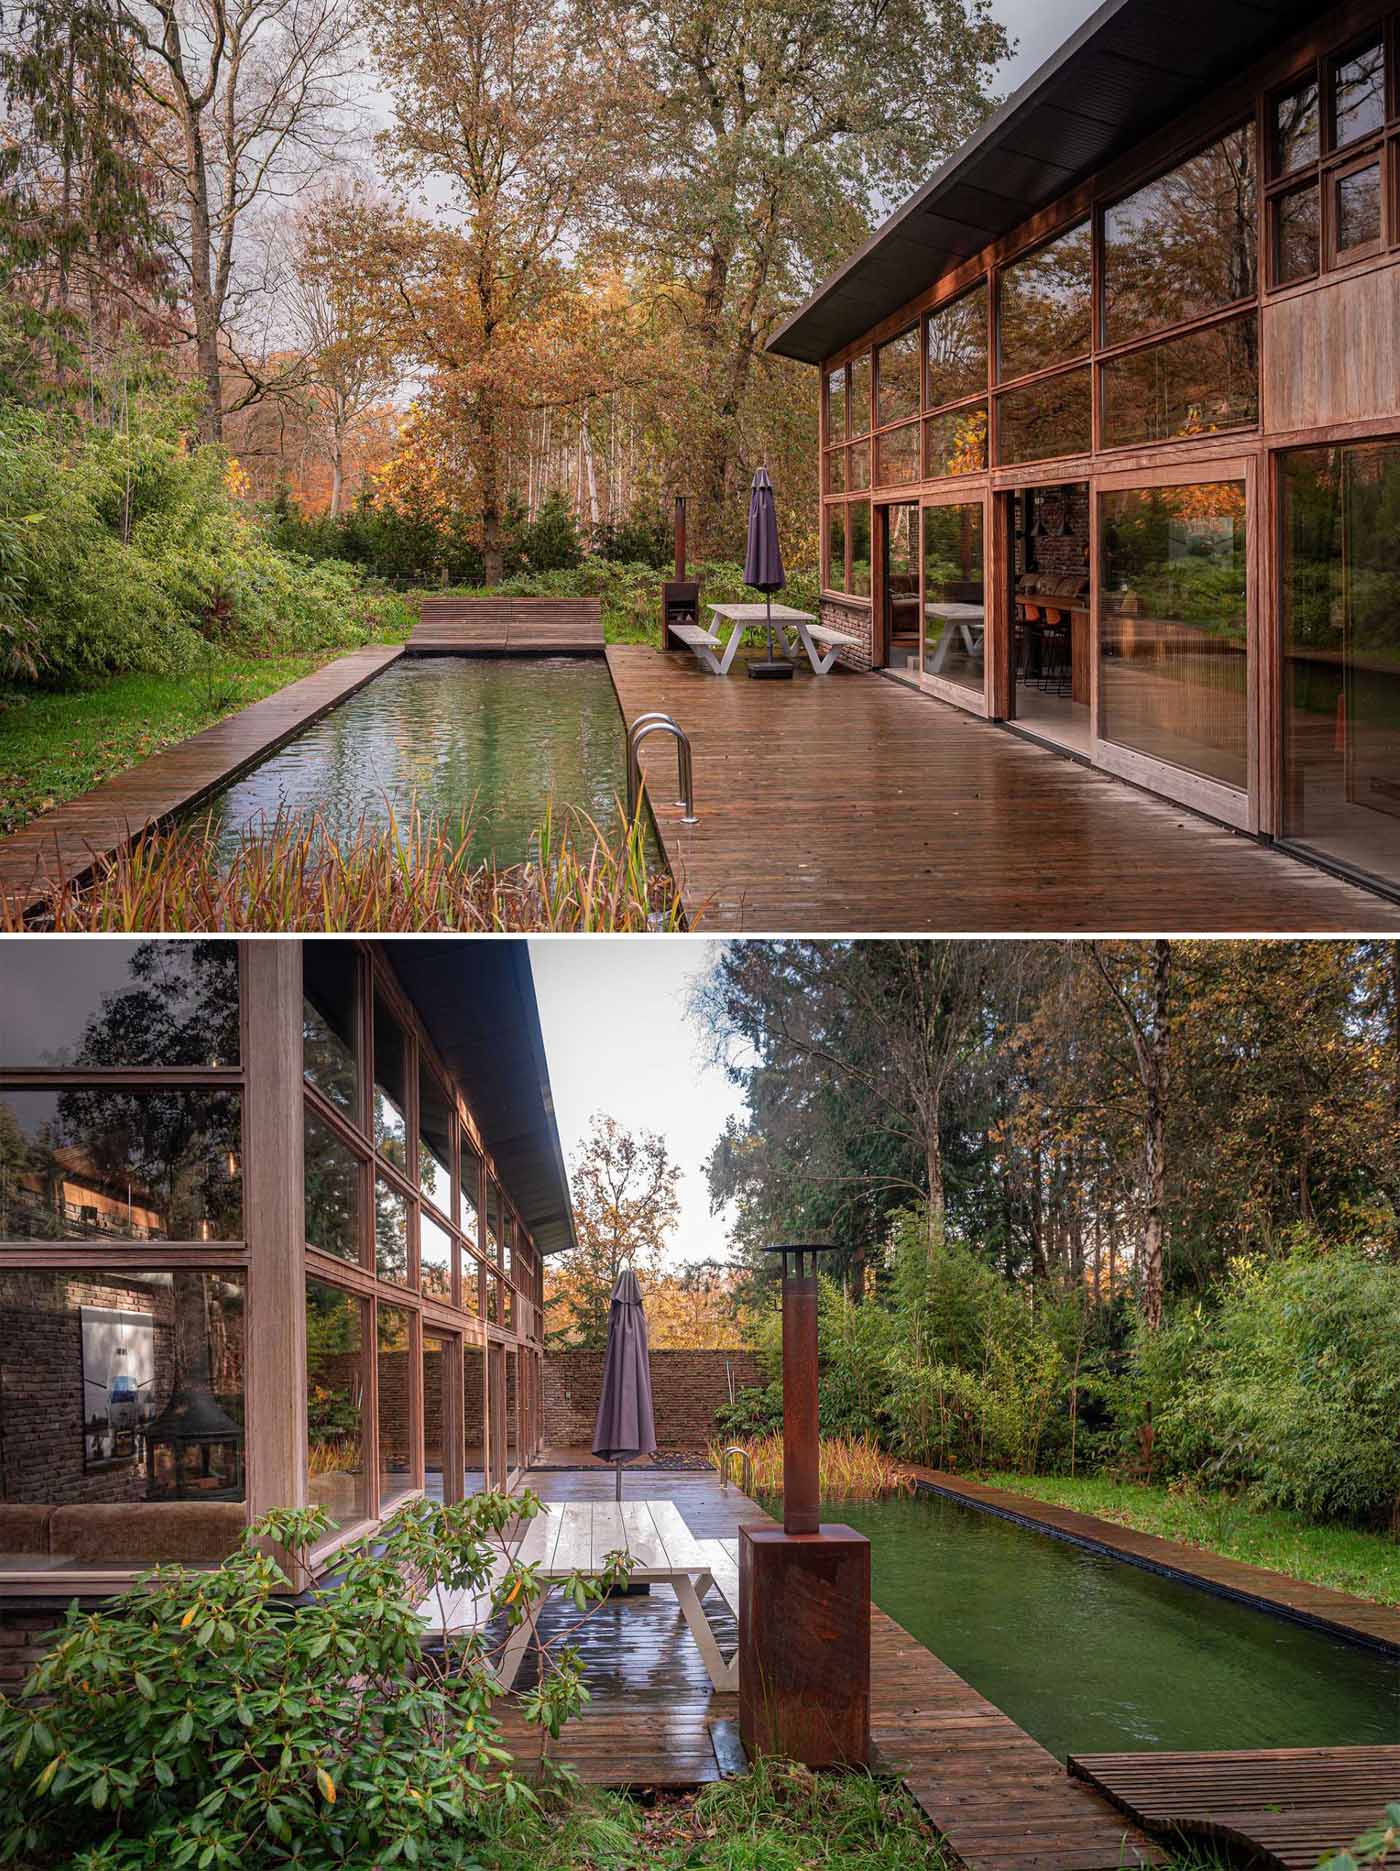 A modern home with rough and rugged materials like bricks and wood, also has a natural swimming pool.